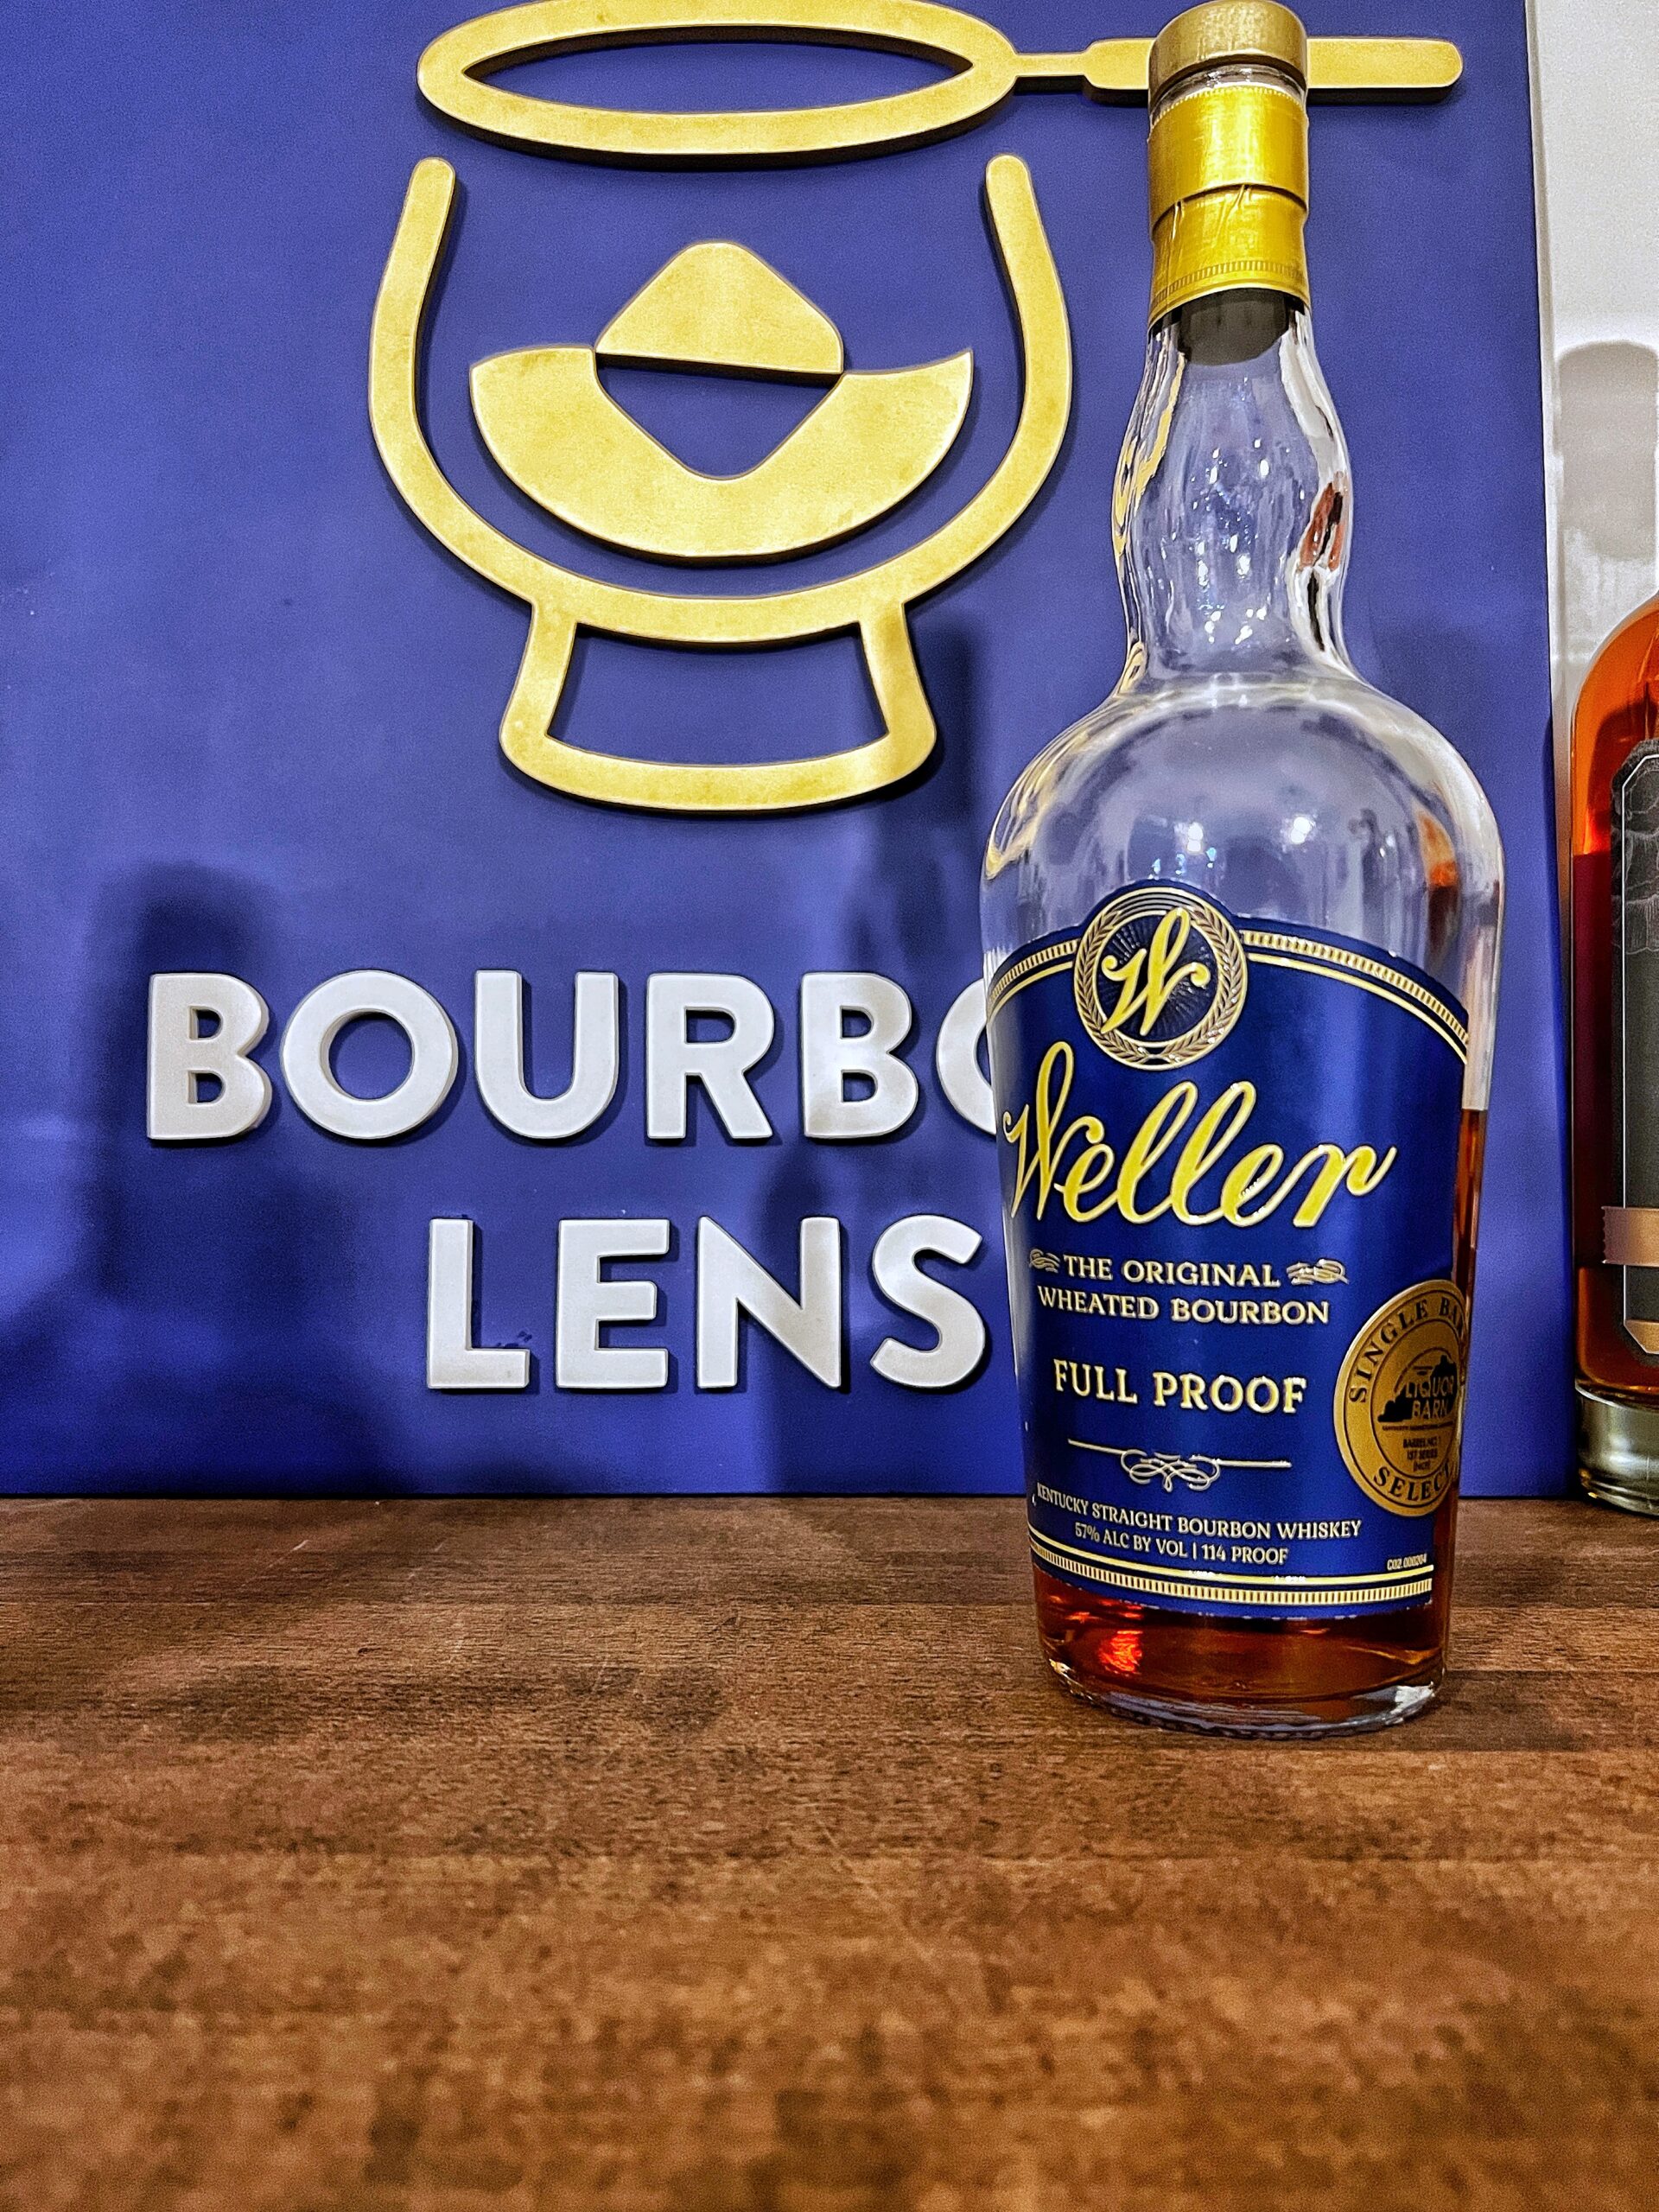 Closing Out Bourbon Heritage Month With A Look at Weller Full Proof